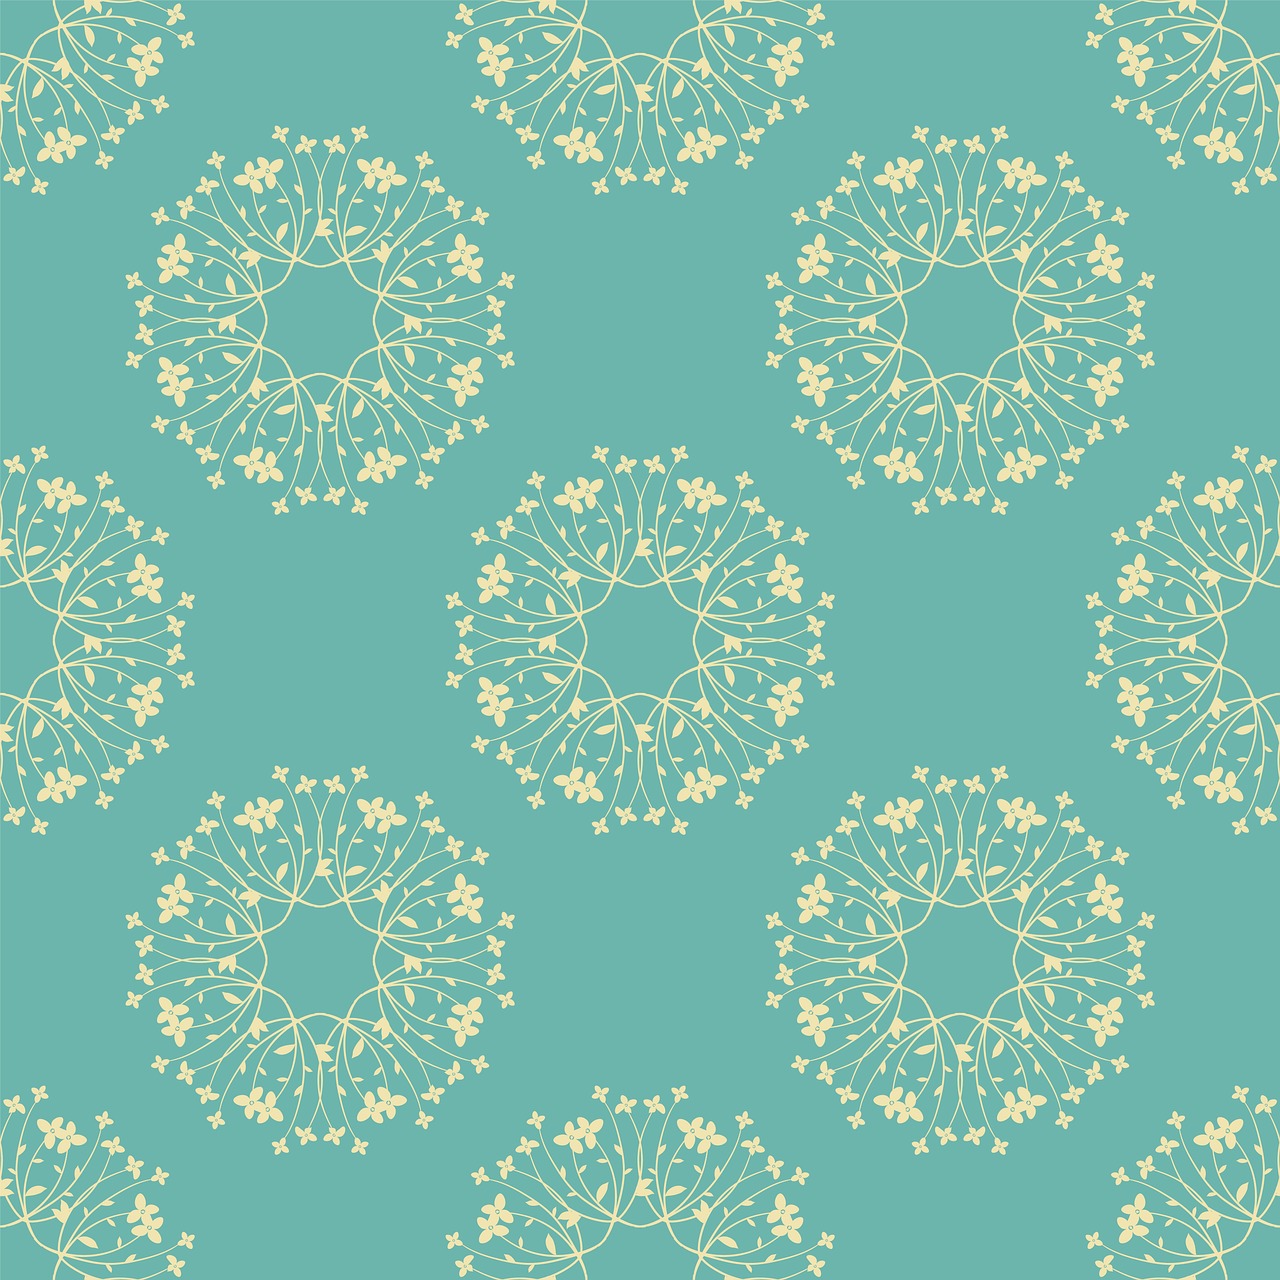 a pattern with stars on a blue background, vector art, art nouveau, hearts, pale yellow wallpaper, floral lacework, round elements